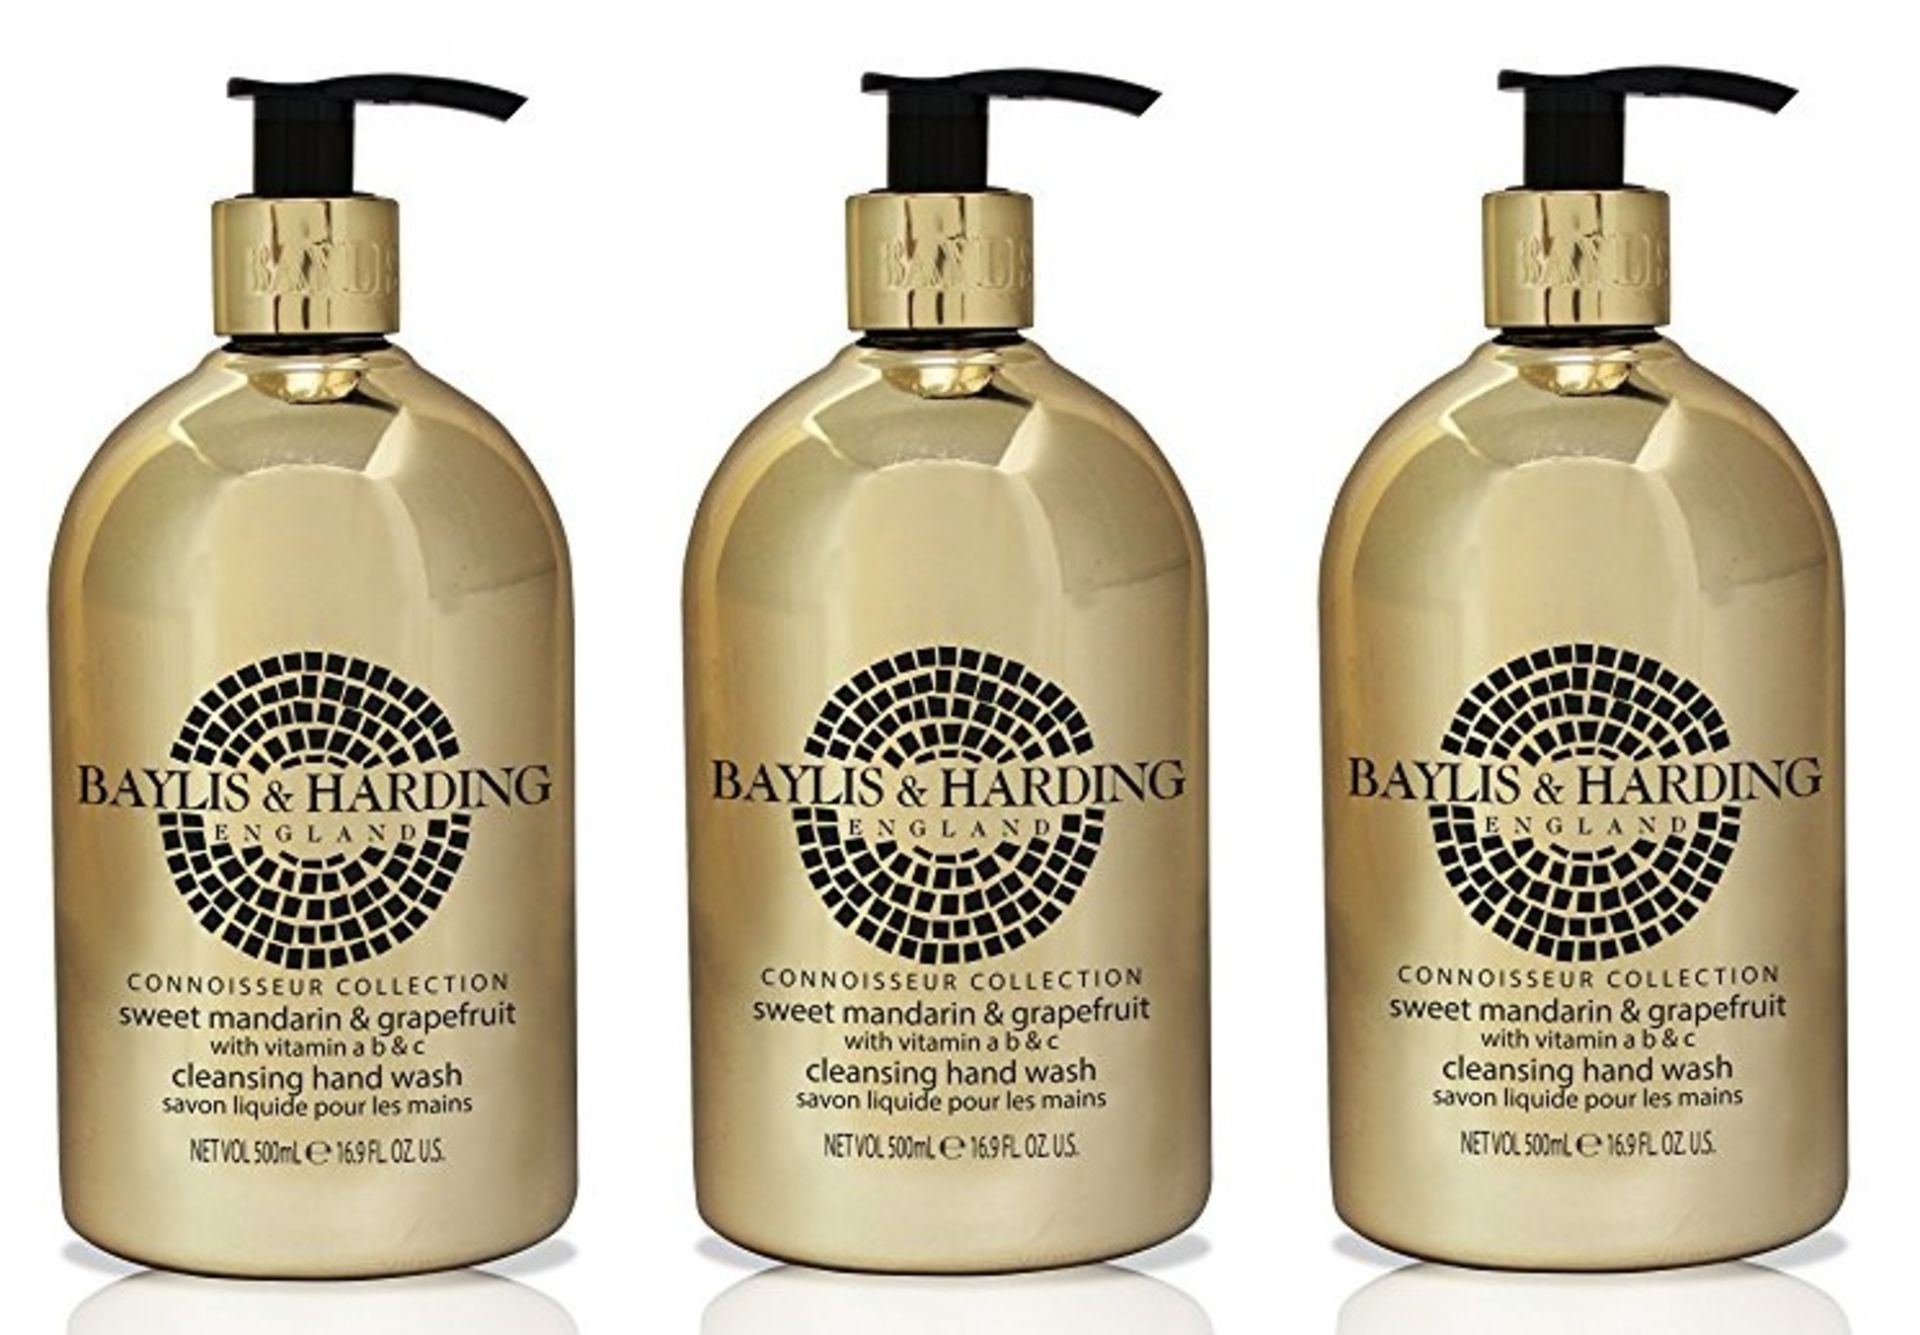 V *TRADE QTY* Brand New 3 x Limited Edition Baylis & Harding Mosaic Connoisseur 500ml Sweet Manderin